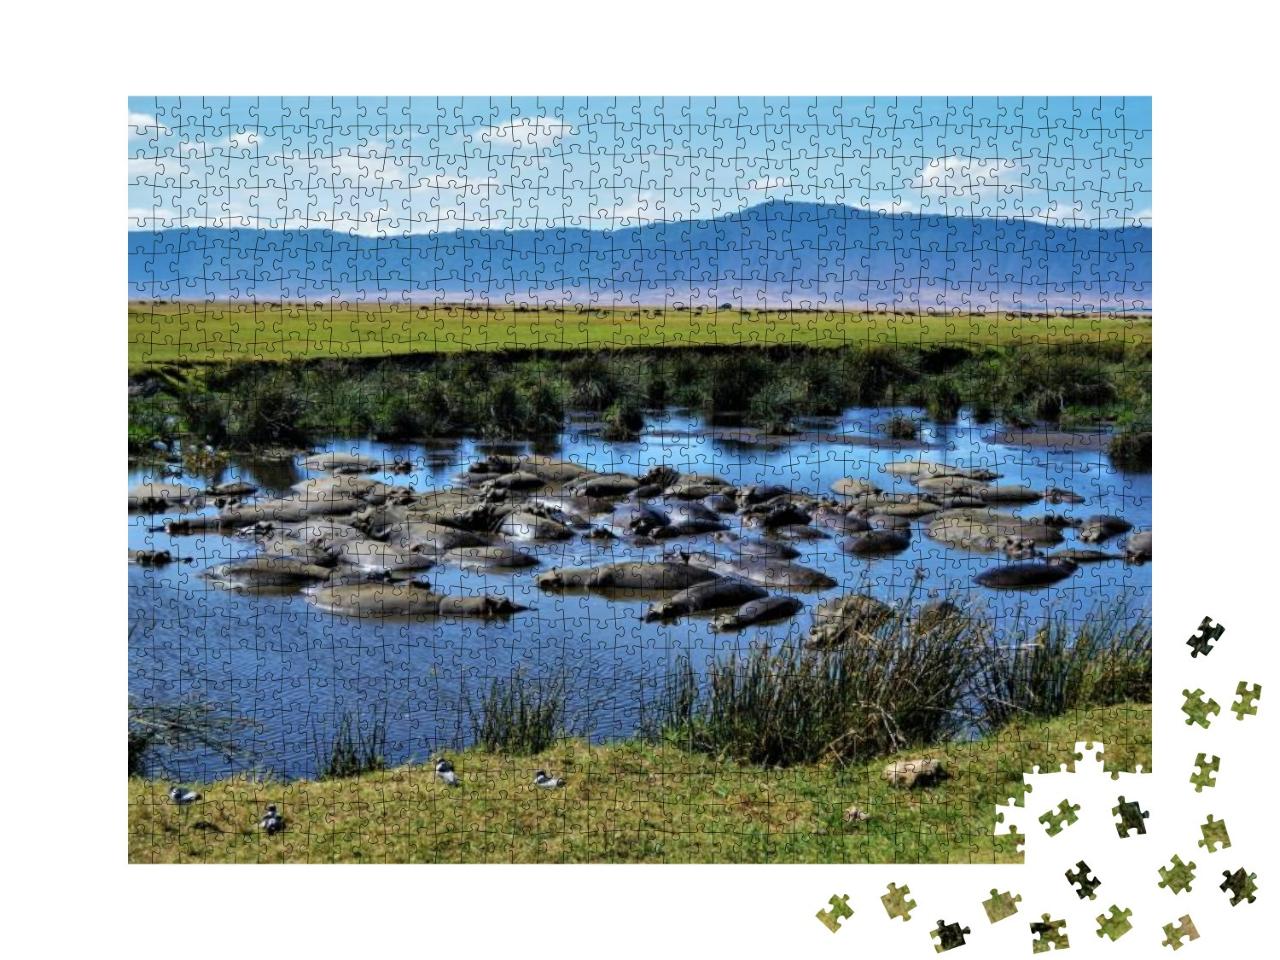 Hippo Pool, Ngorongoro Crater, Tanzania... Jigsaw Puzzle with 1000 pieces